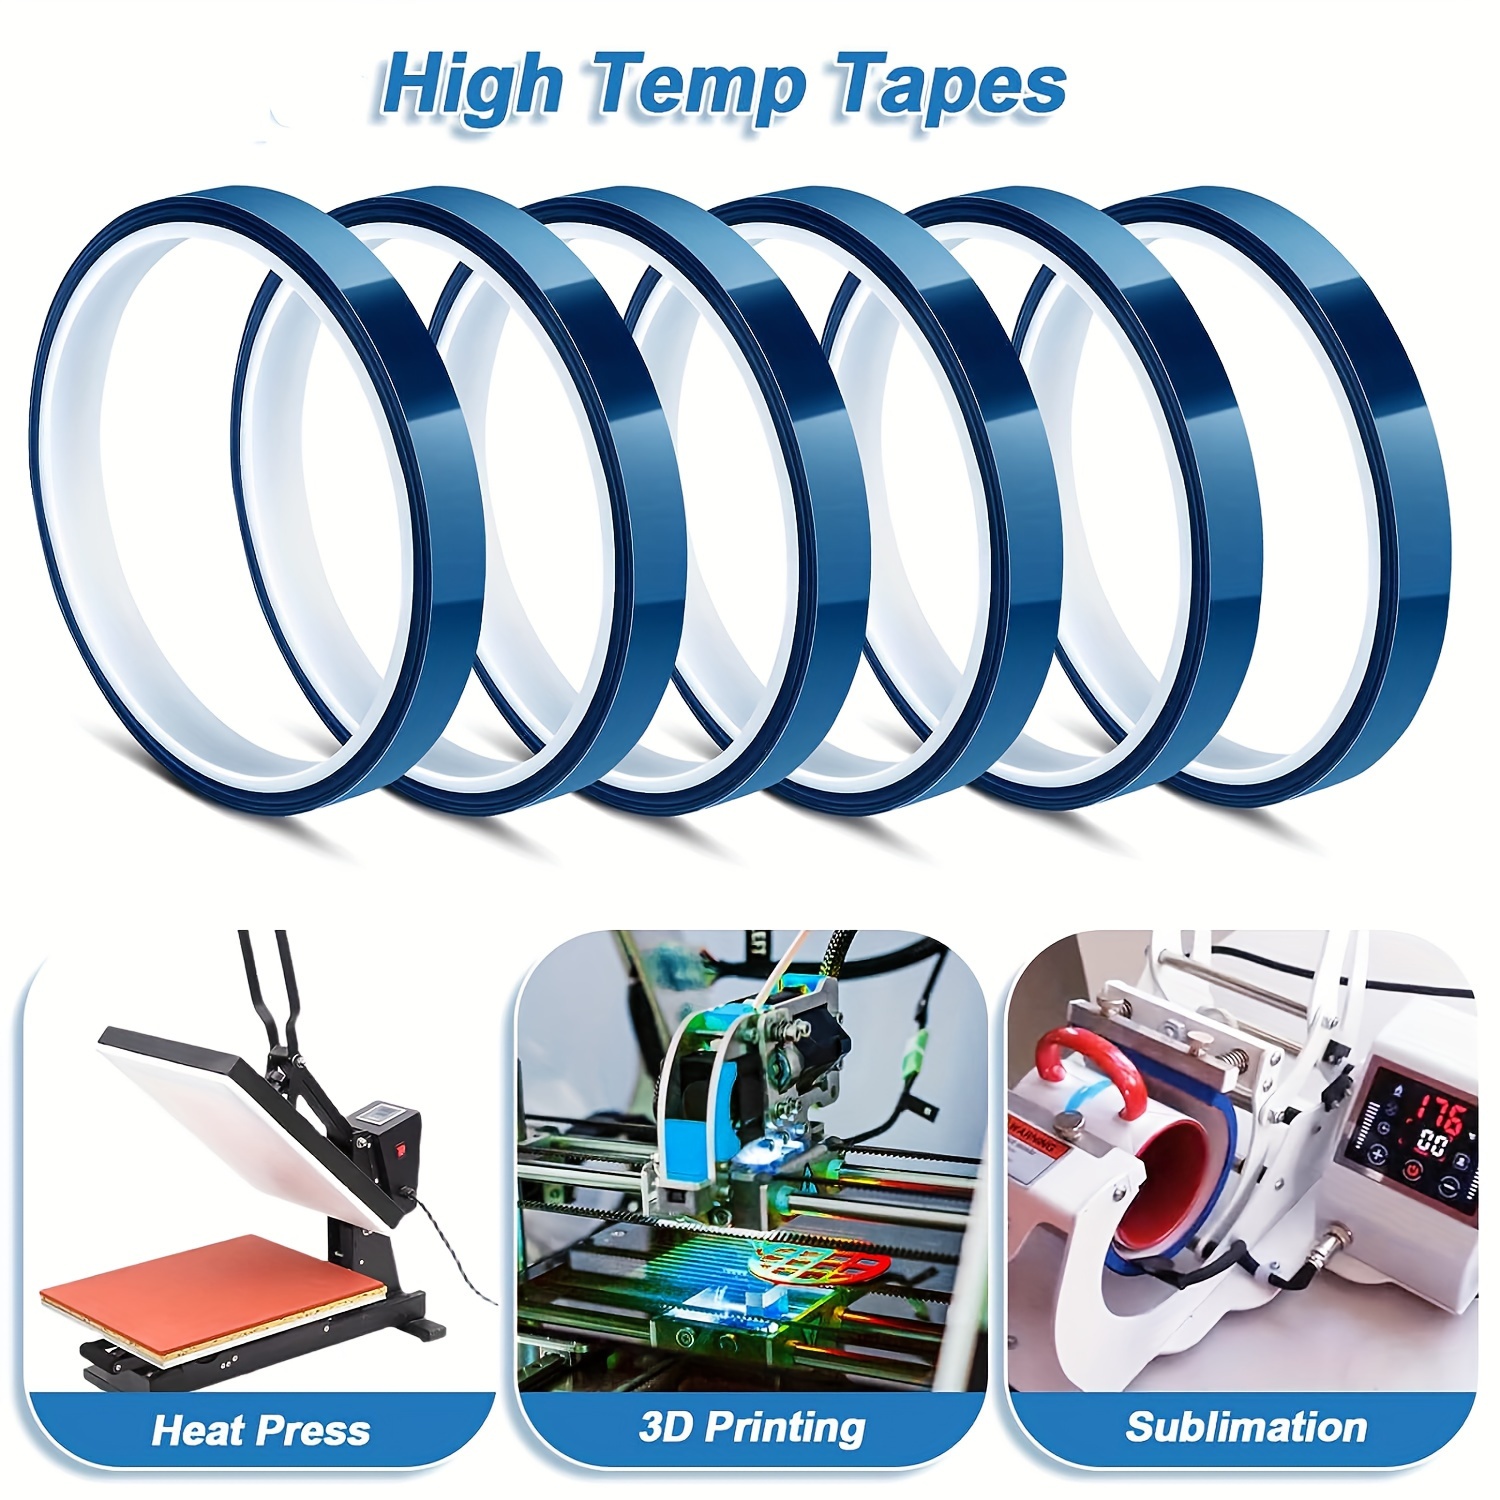 4 Rolls 10mmx33m Heat Resistant Tape For Heat Press Heat Transfer Tape  Sublimation Tapes for Electronics Printing DIY Crafts